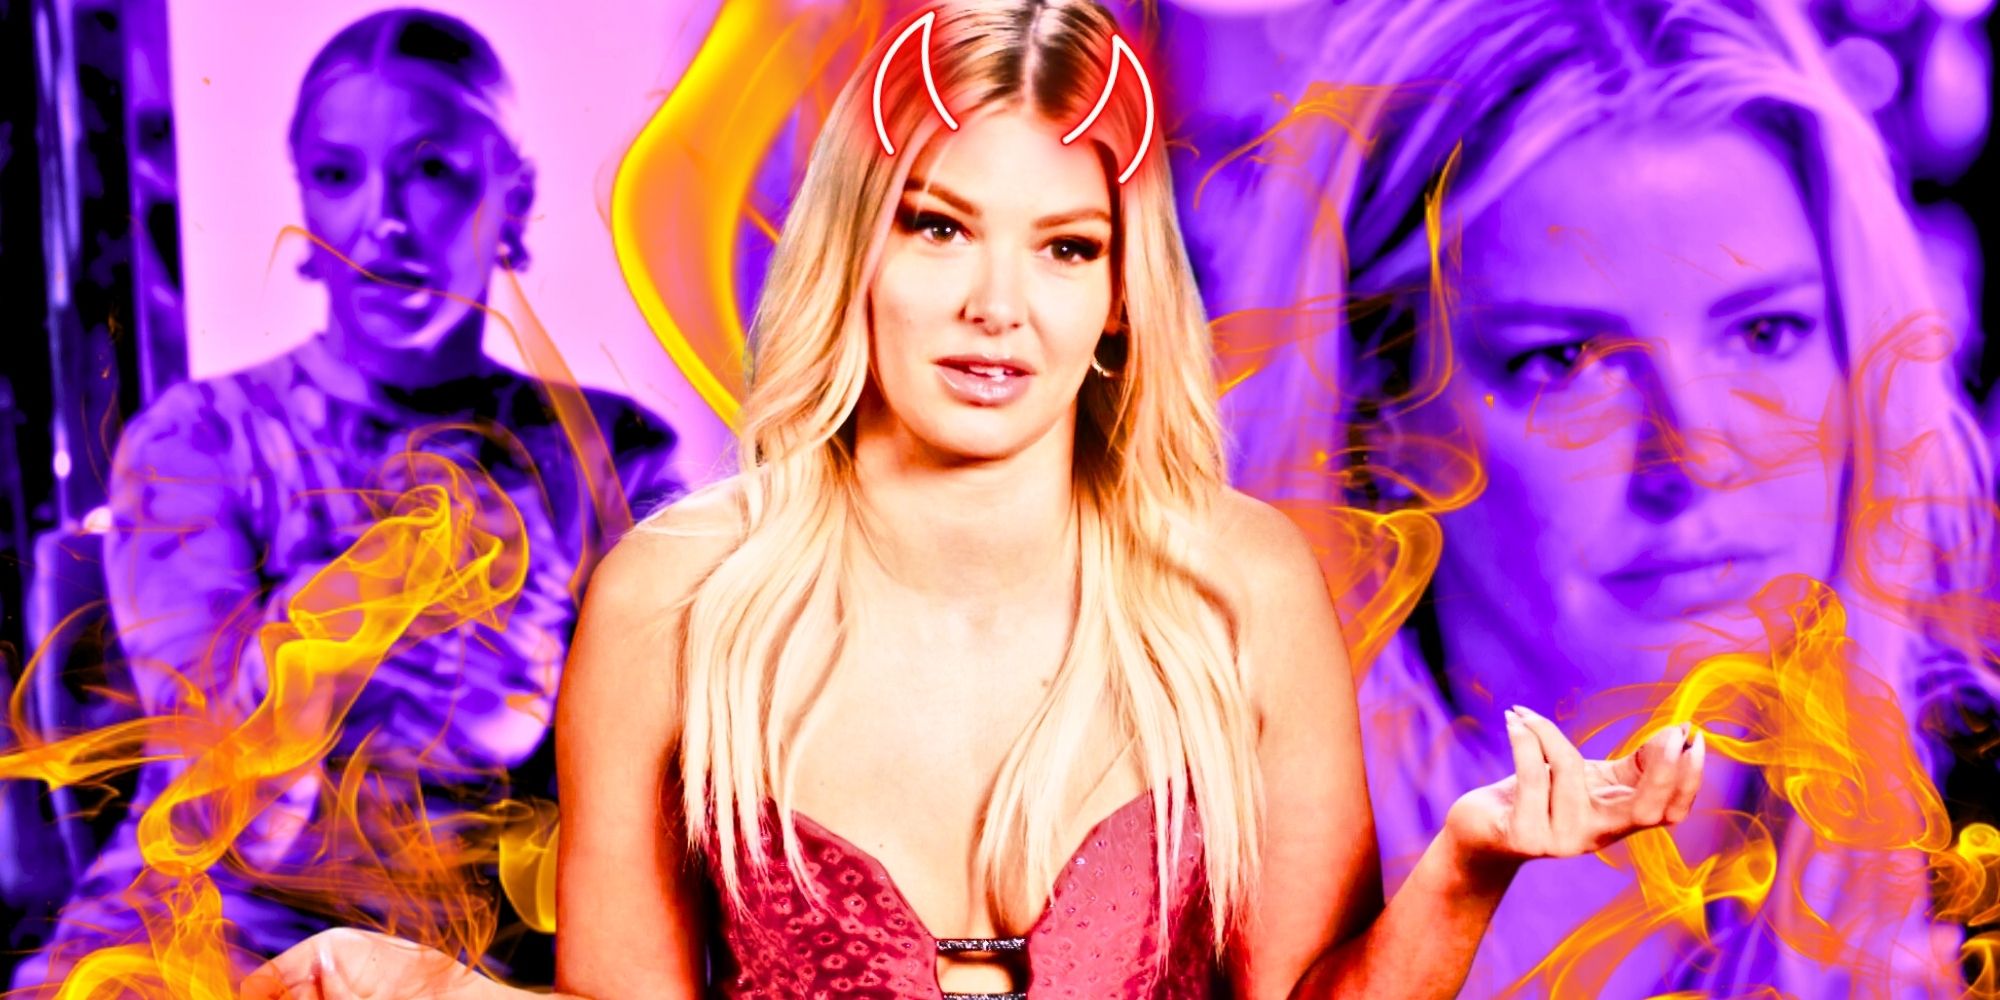 Vanderpump Rules' Ariana Madix in a montage with a purple bakcground and flames, with horns on her head.